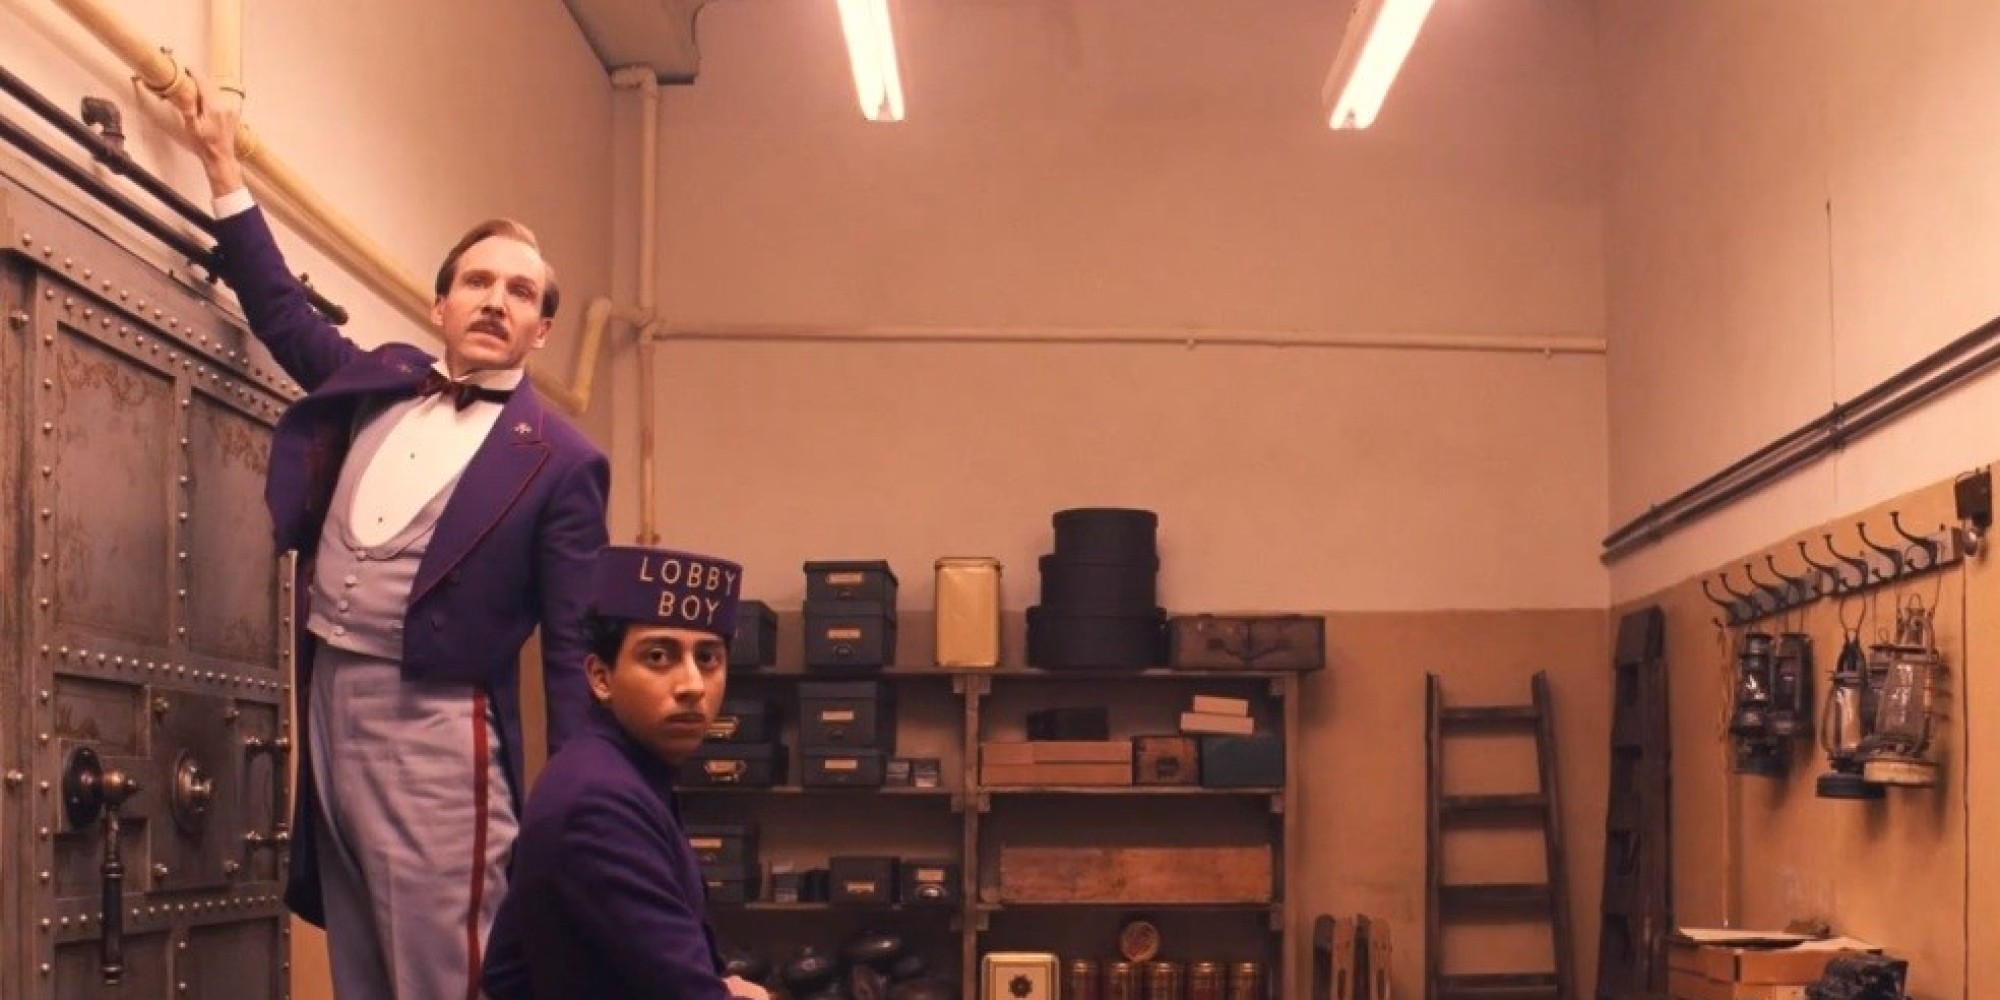 Hints of History in 'The Grand Budapest Hotel